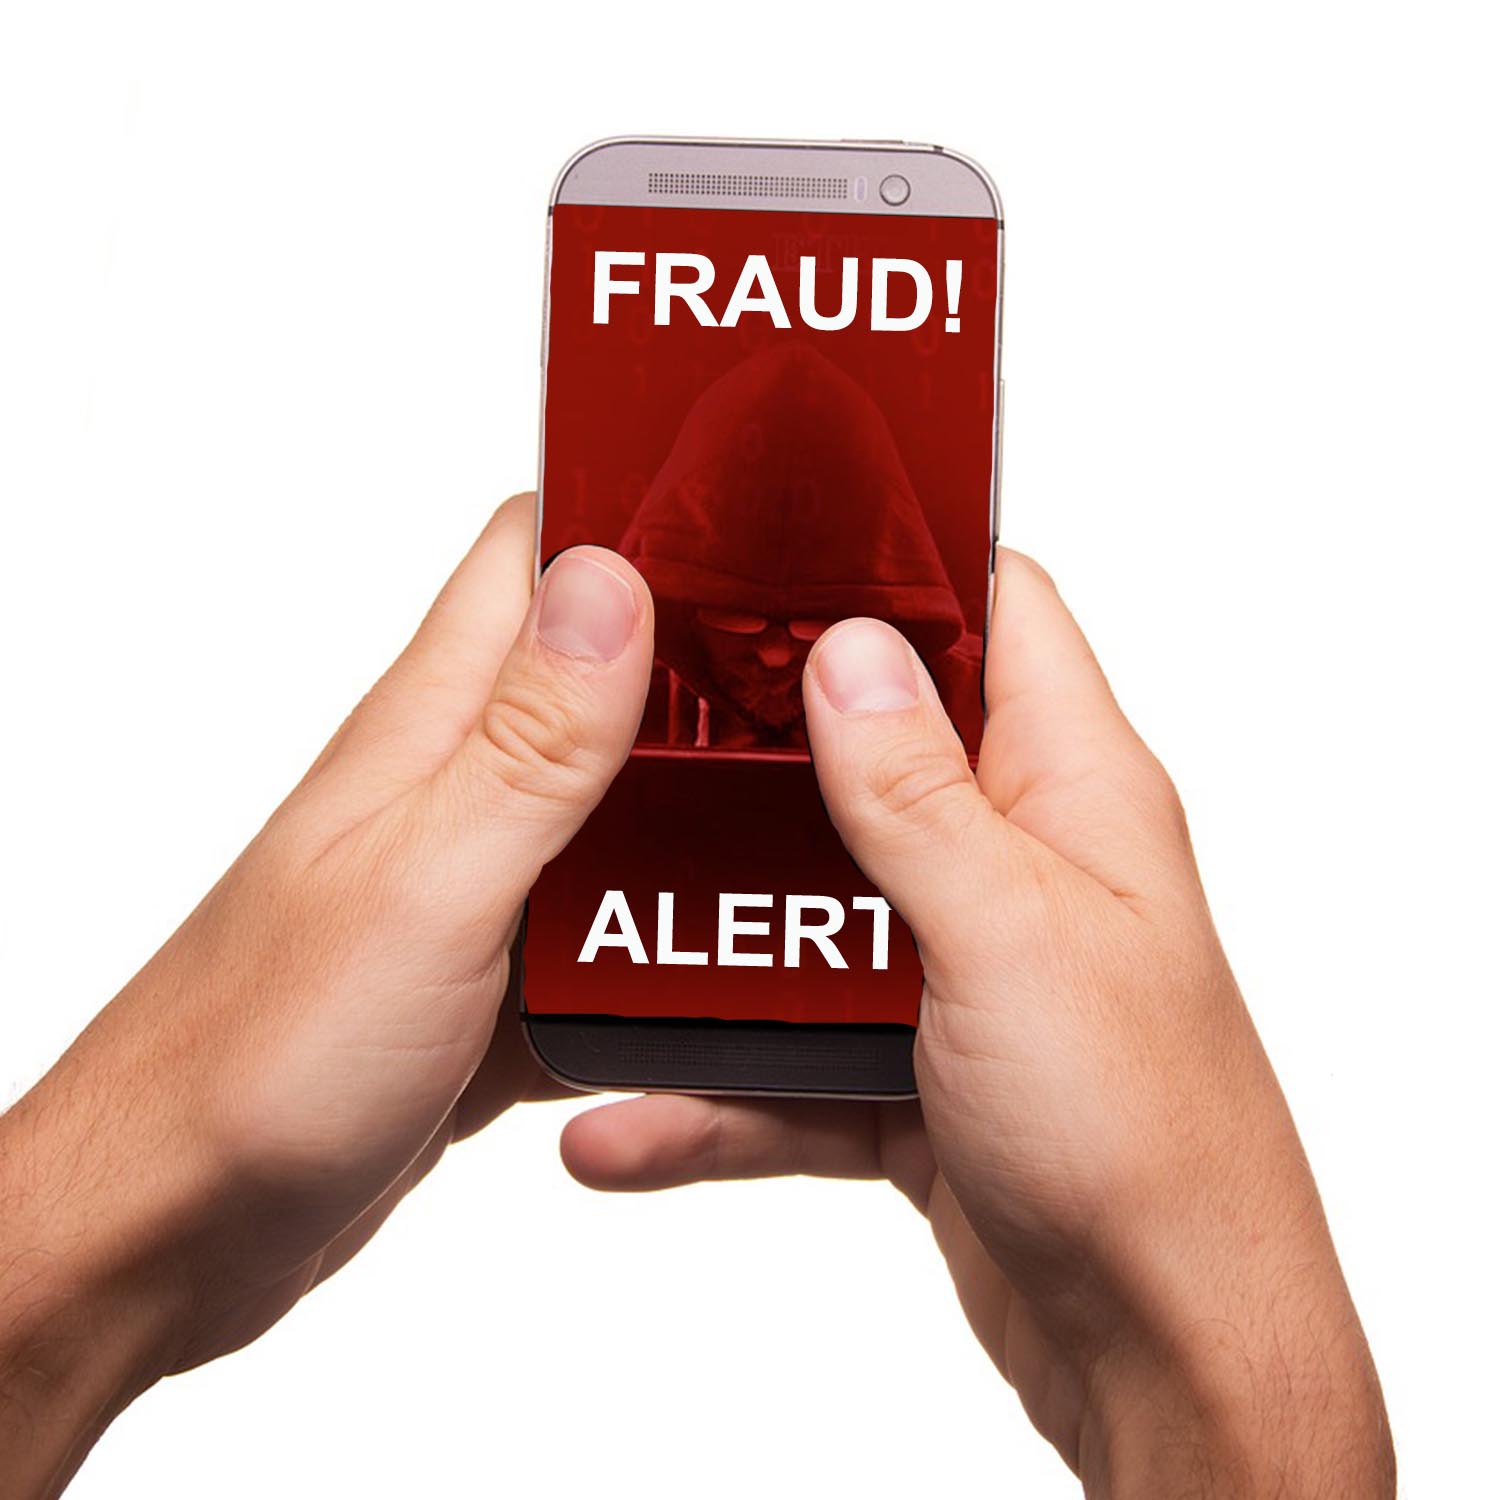 Hands holding a cell phone with image of a hacker in red with text reading "Fraud Alert" flashing across the screen.